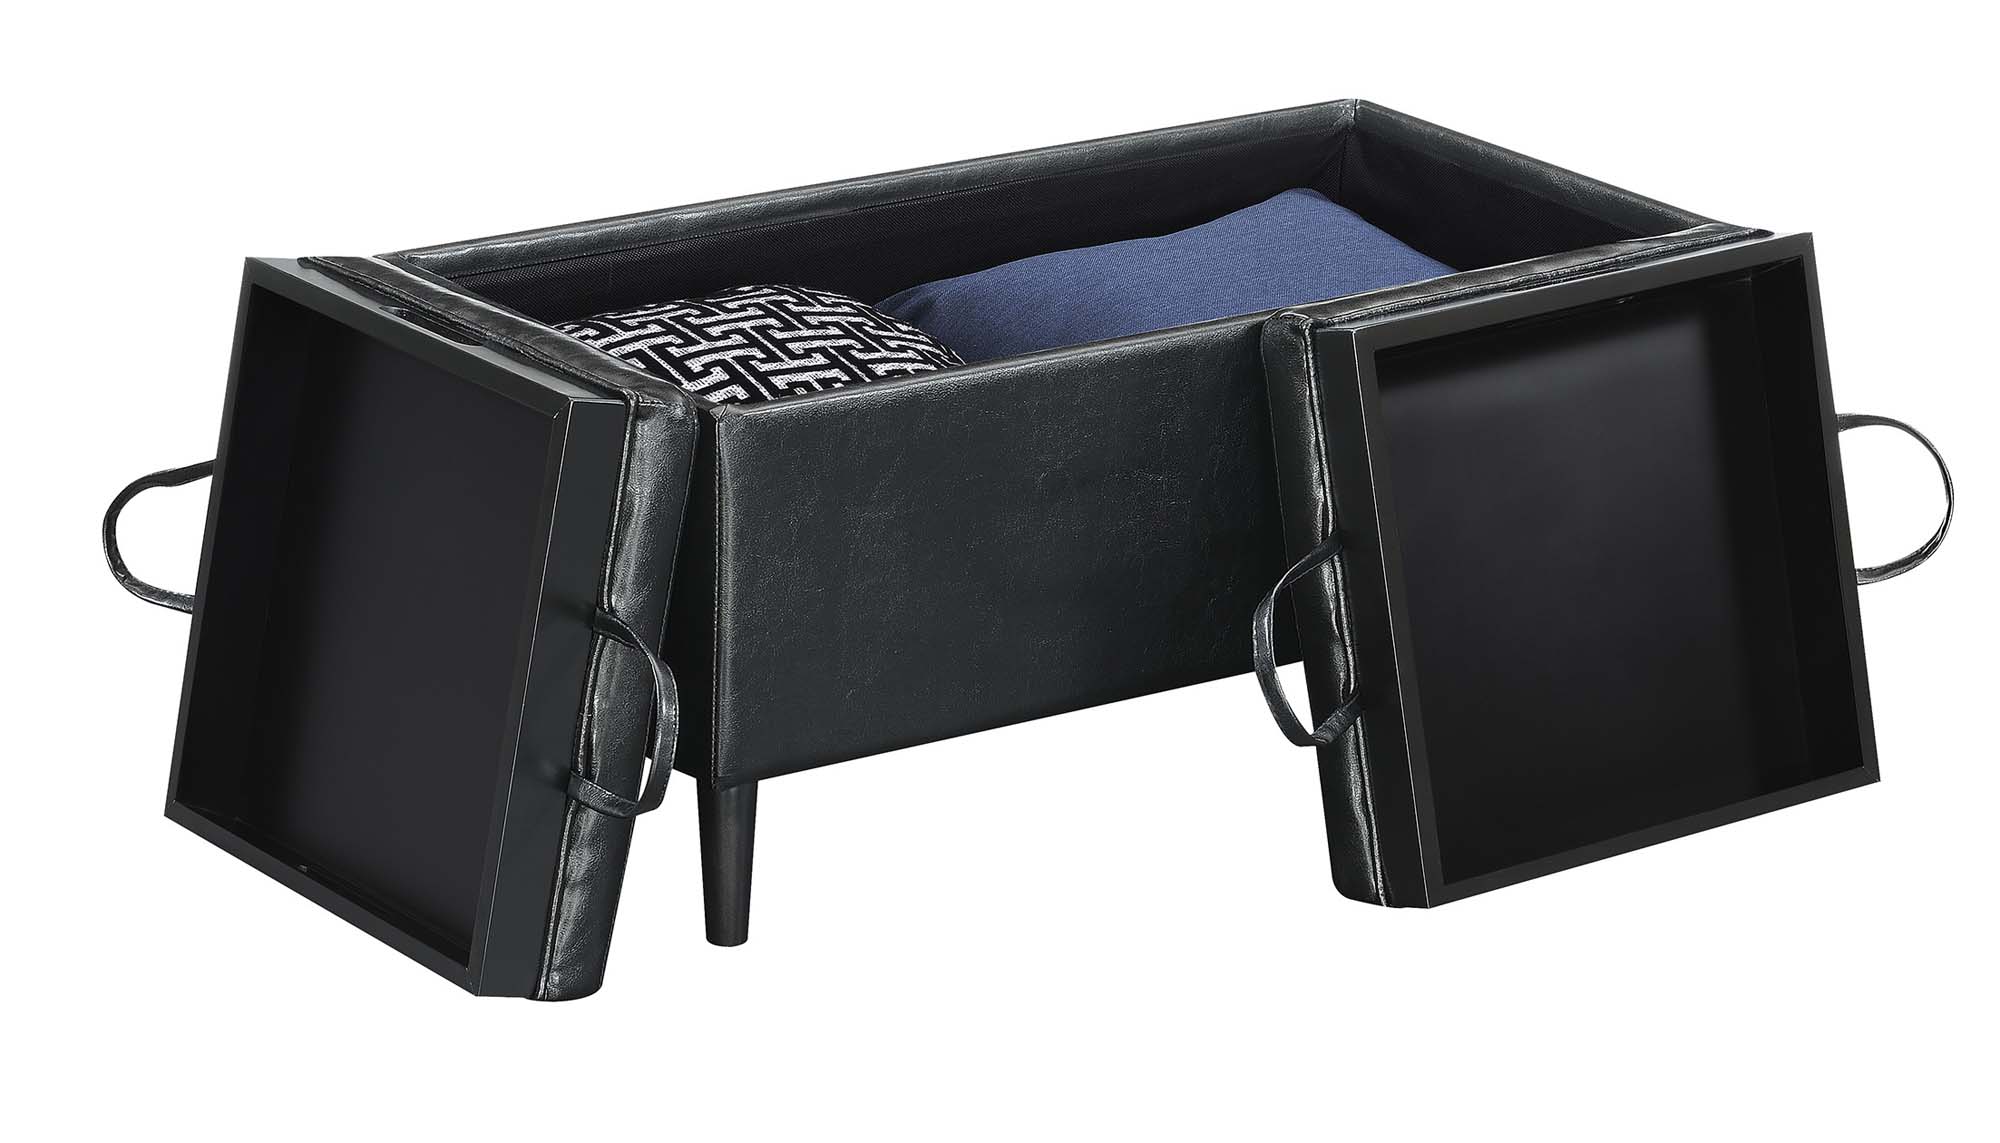 Convenience Concepts Designs4Comfort Magnolia Storage Ottoman with Reversible Trays, Black Faux Leather - image 4 of 4